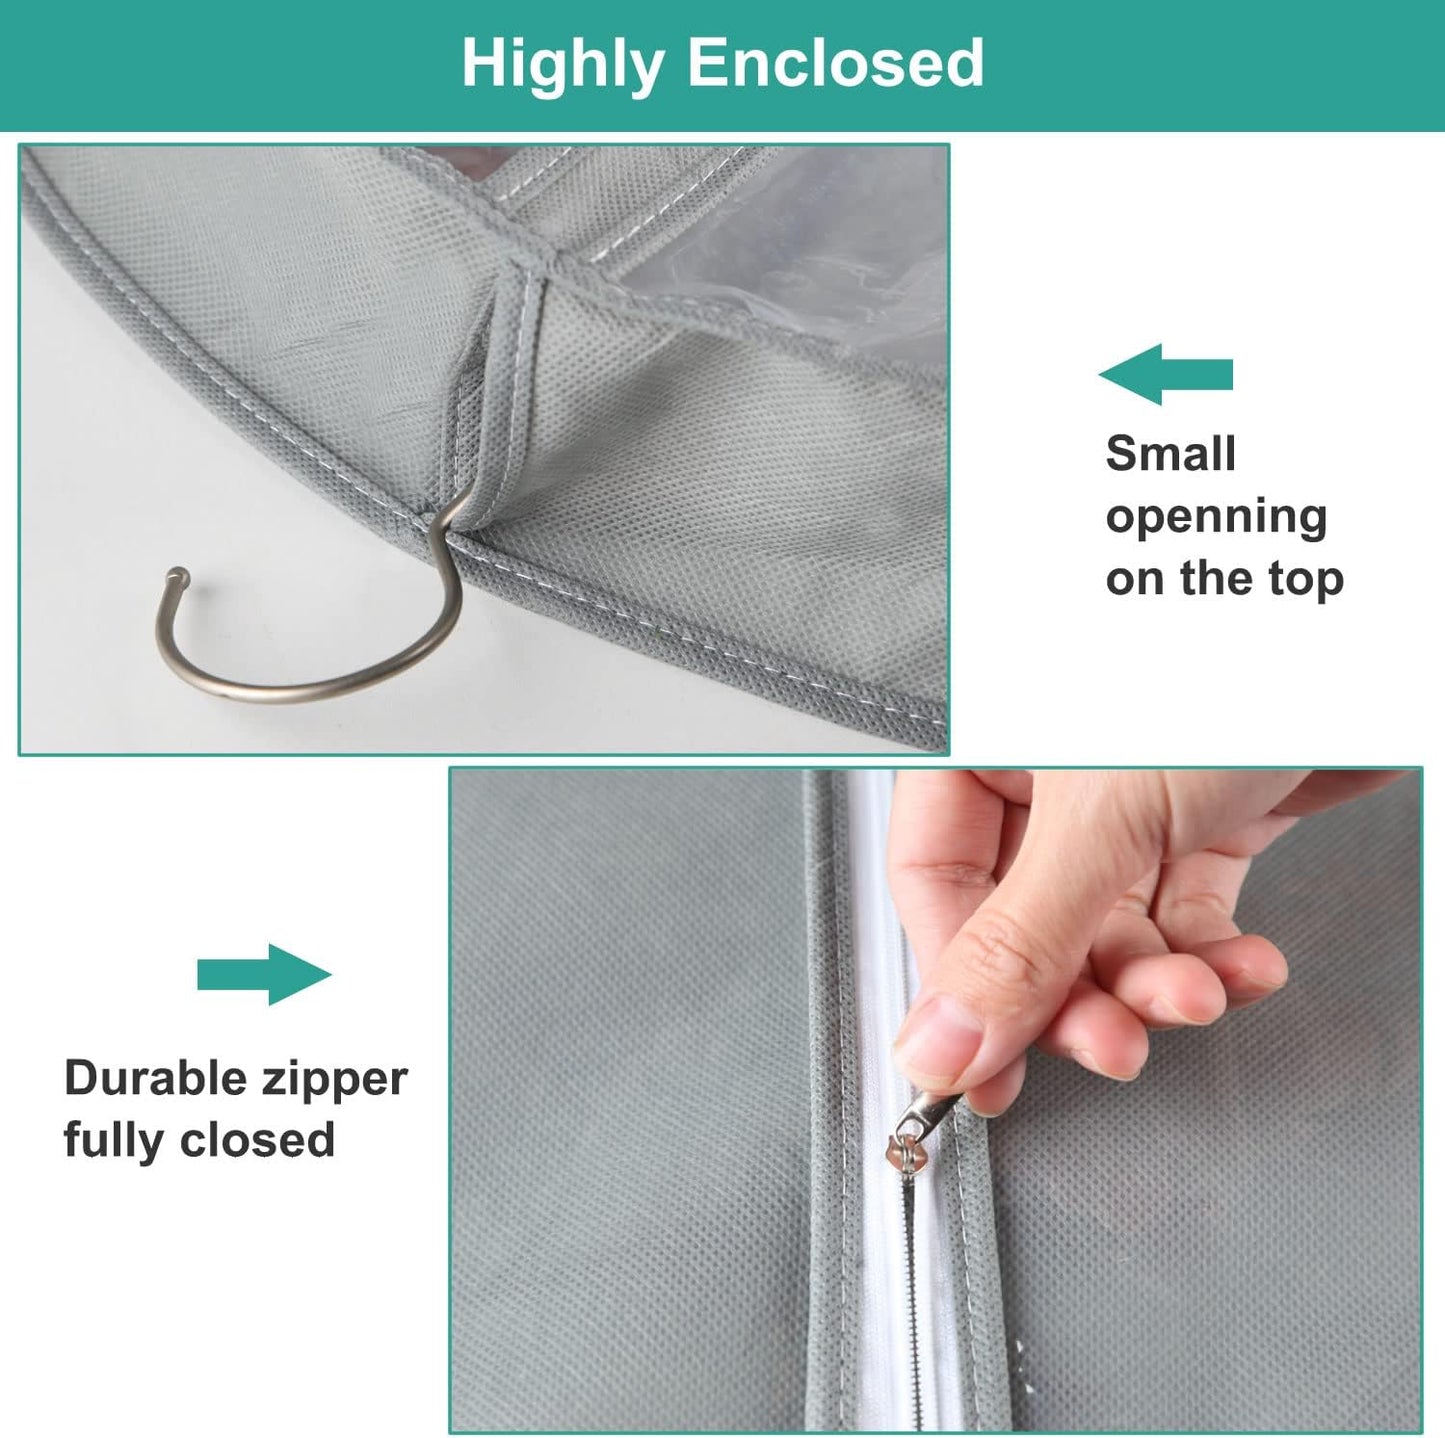 ZSURLUX Garment Bags for Clothes 60 x 100cm 2Pack, Moth Proof Clothes Covers with Zip, Hanging Storage Protector Bags for Wardrobe, Travel, Suitable for Suit, Coat, Jackets, Jumpers,etc. Grey